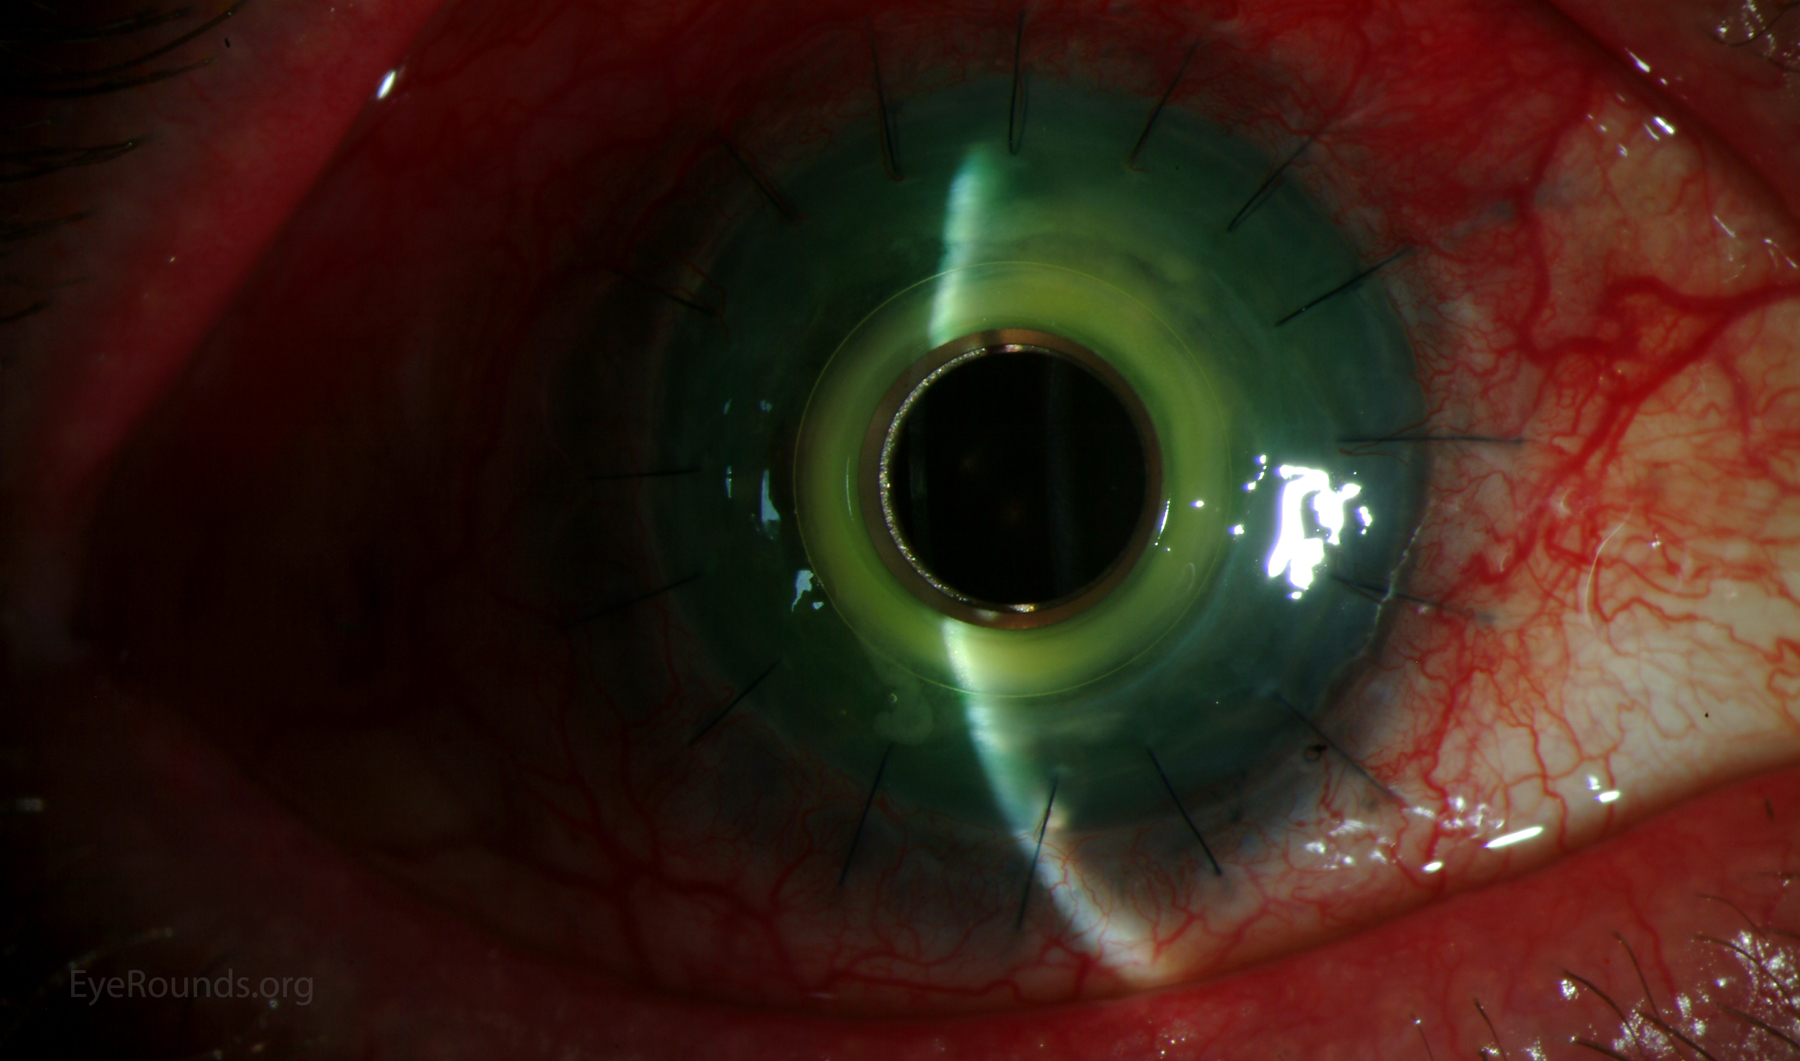 KPro Infected - Slit Lamp View